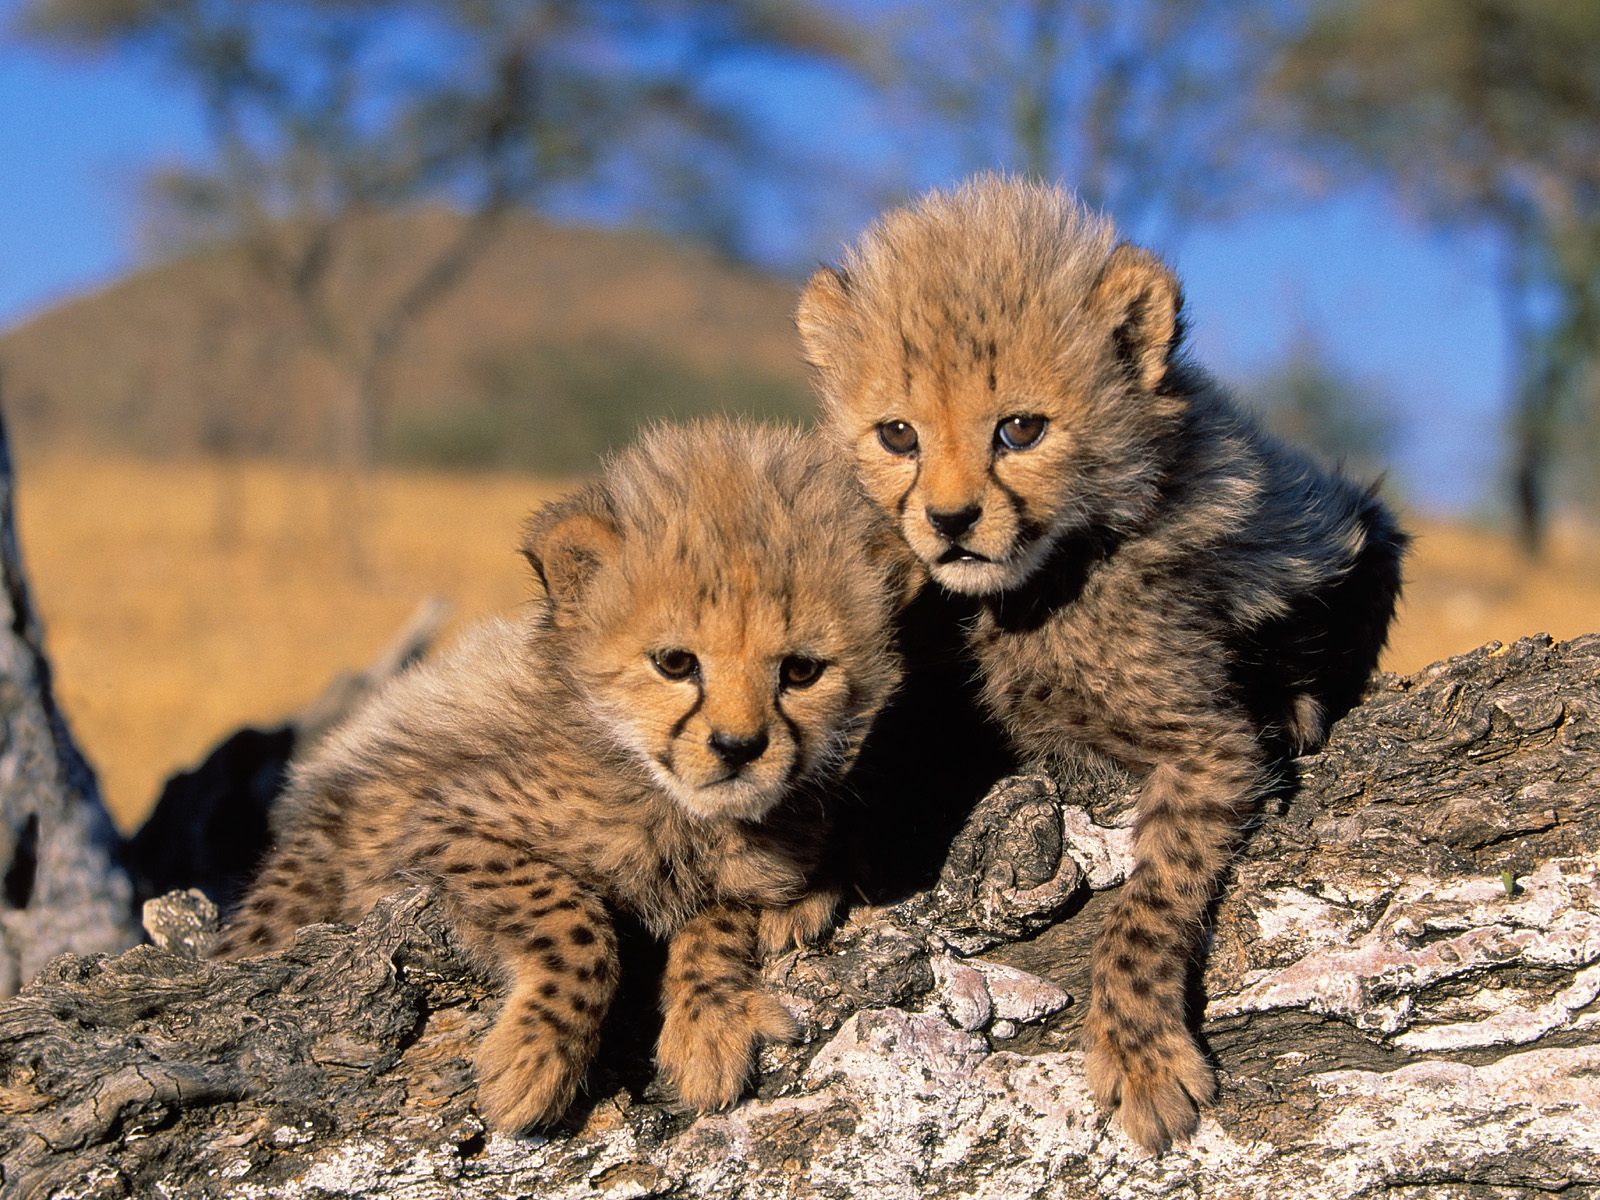 Free HQ Cheetah Cubs Africa Wallpaper   Free HQ Wallpapers